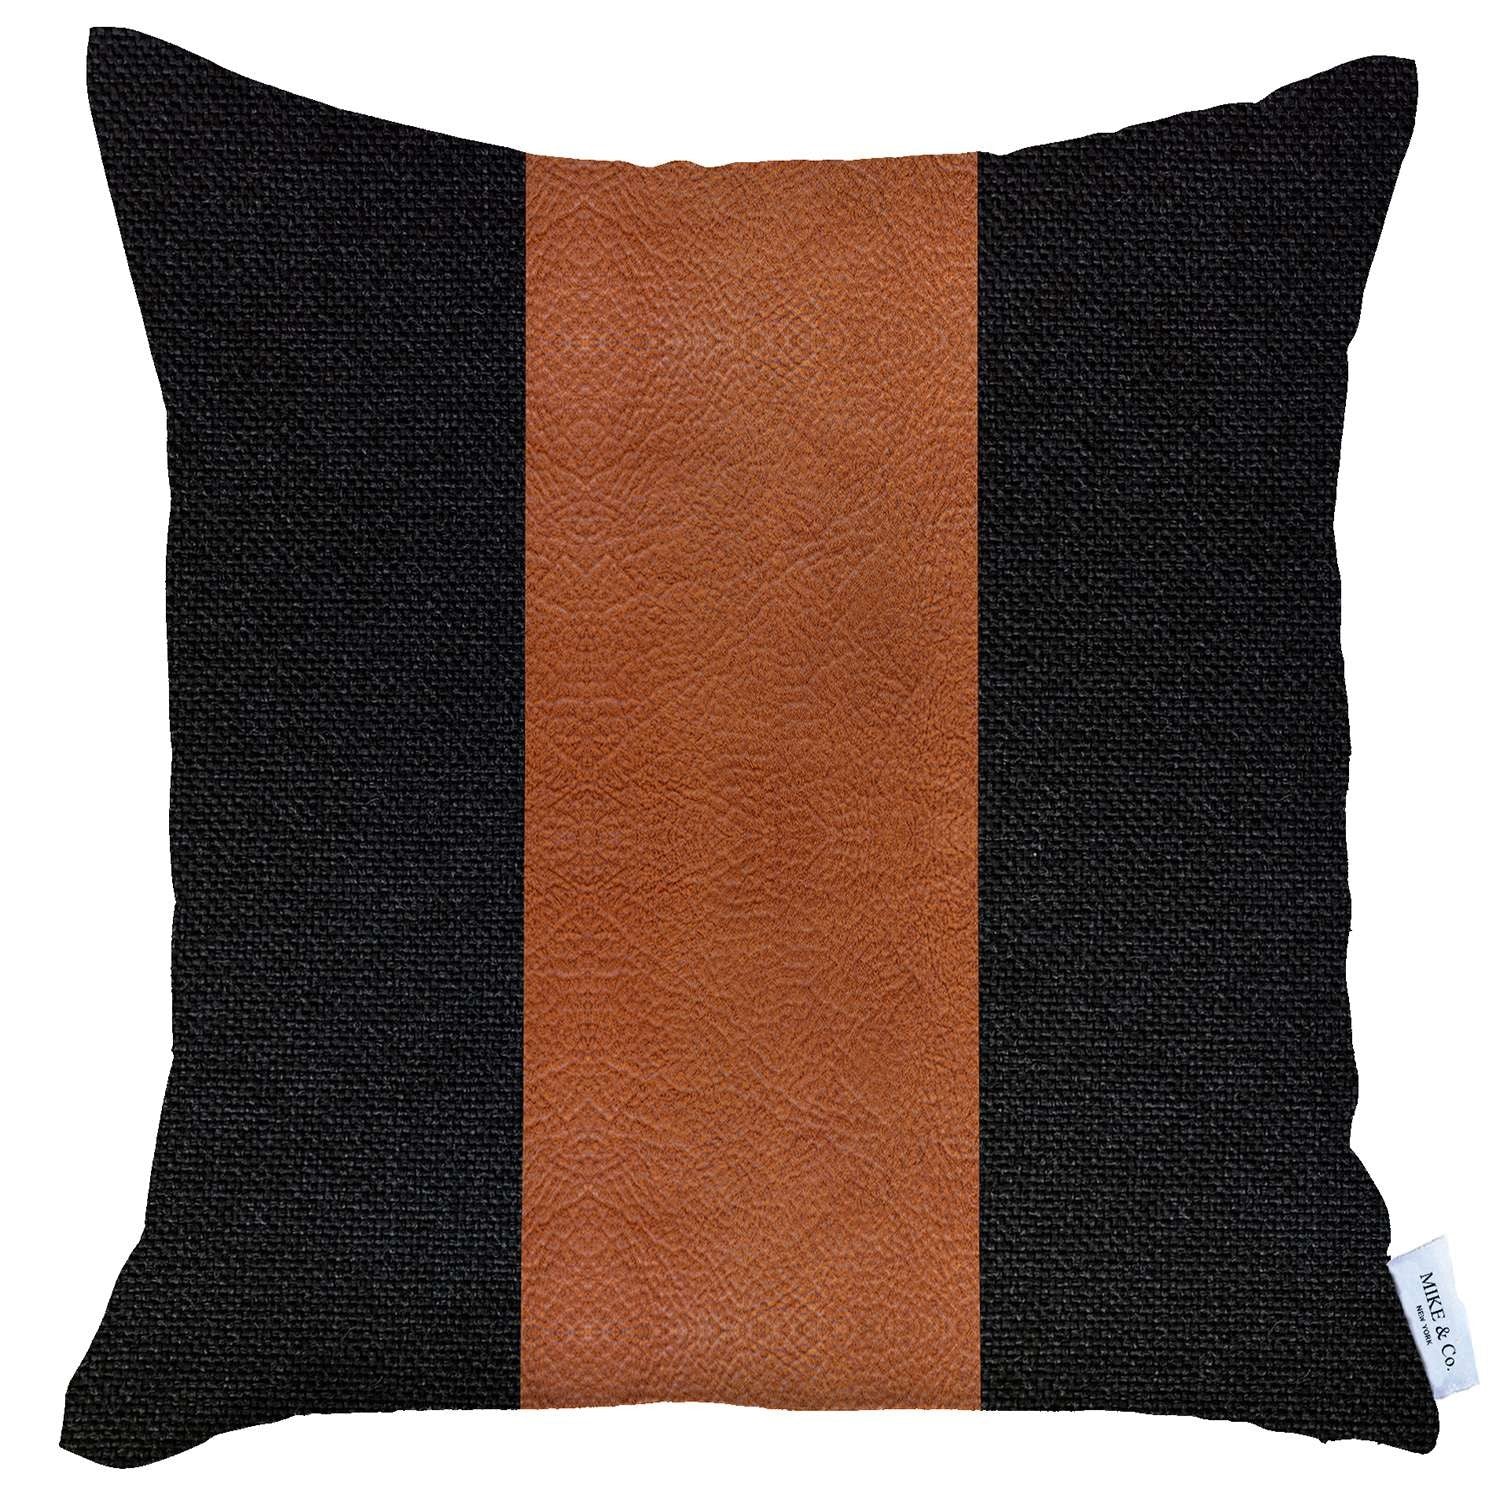 Black and Brown Strap Faux Leather Throw Pillow